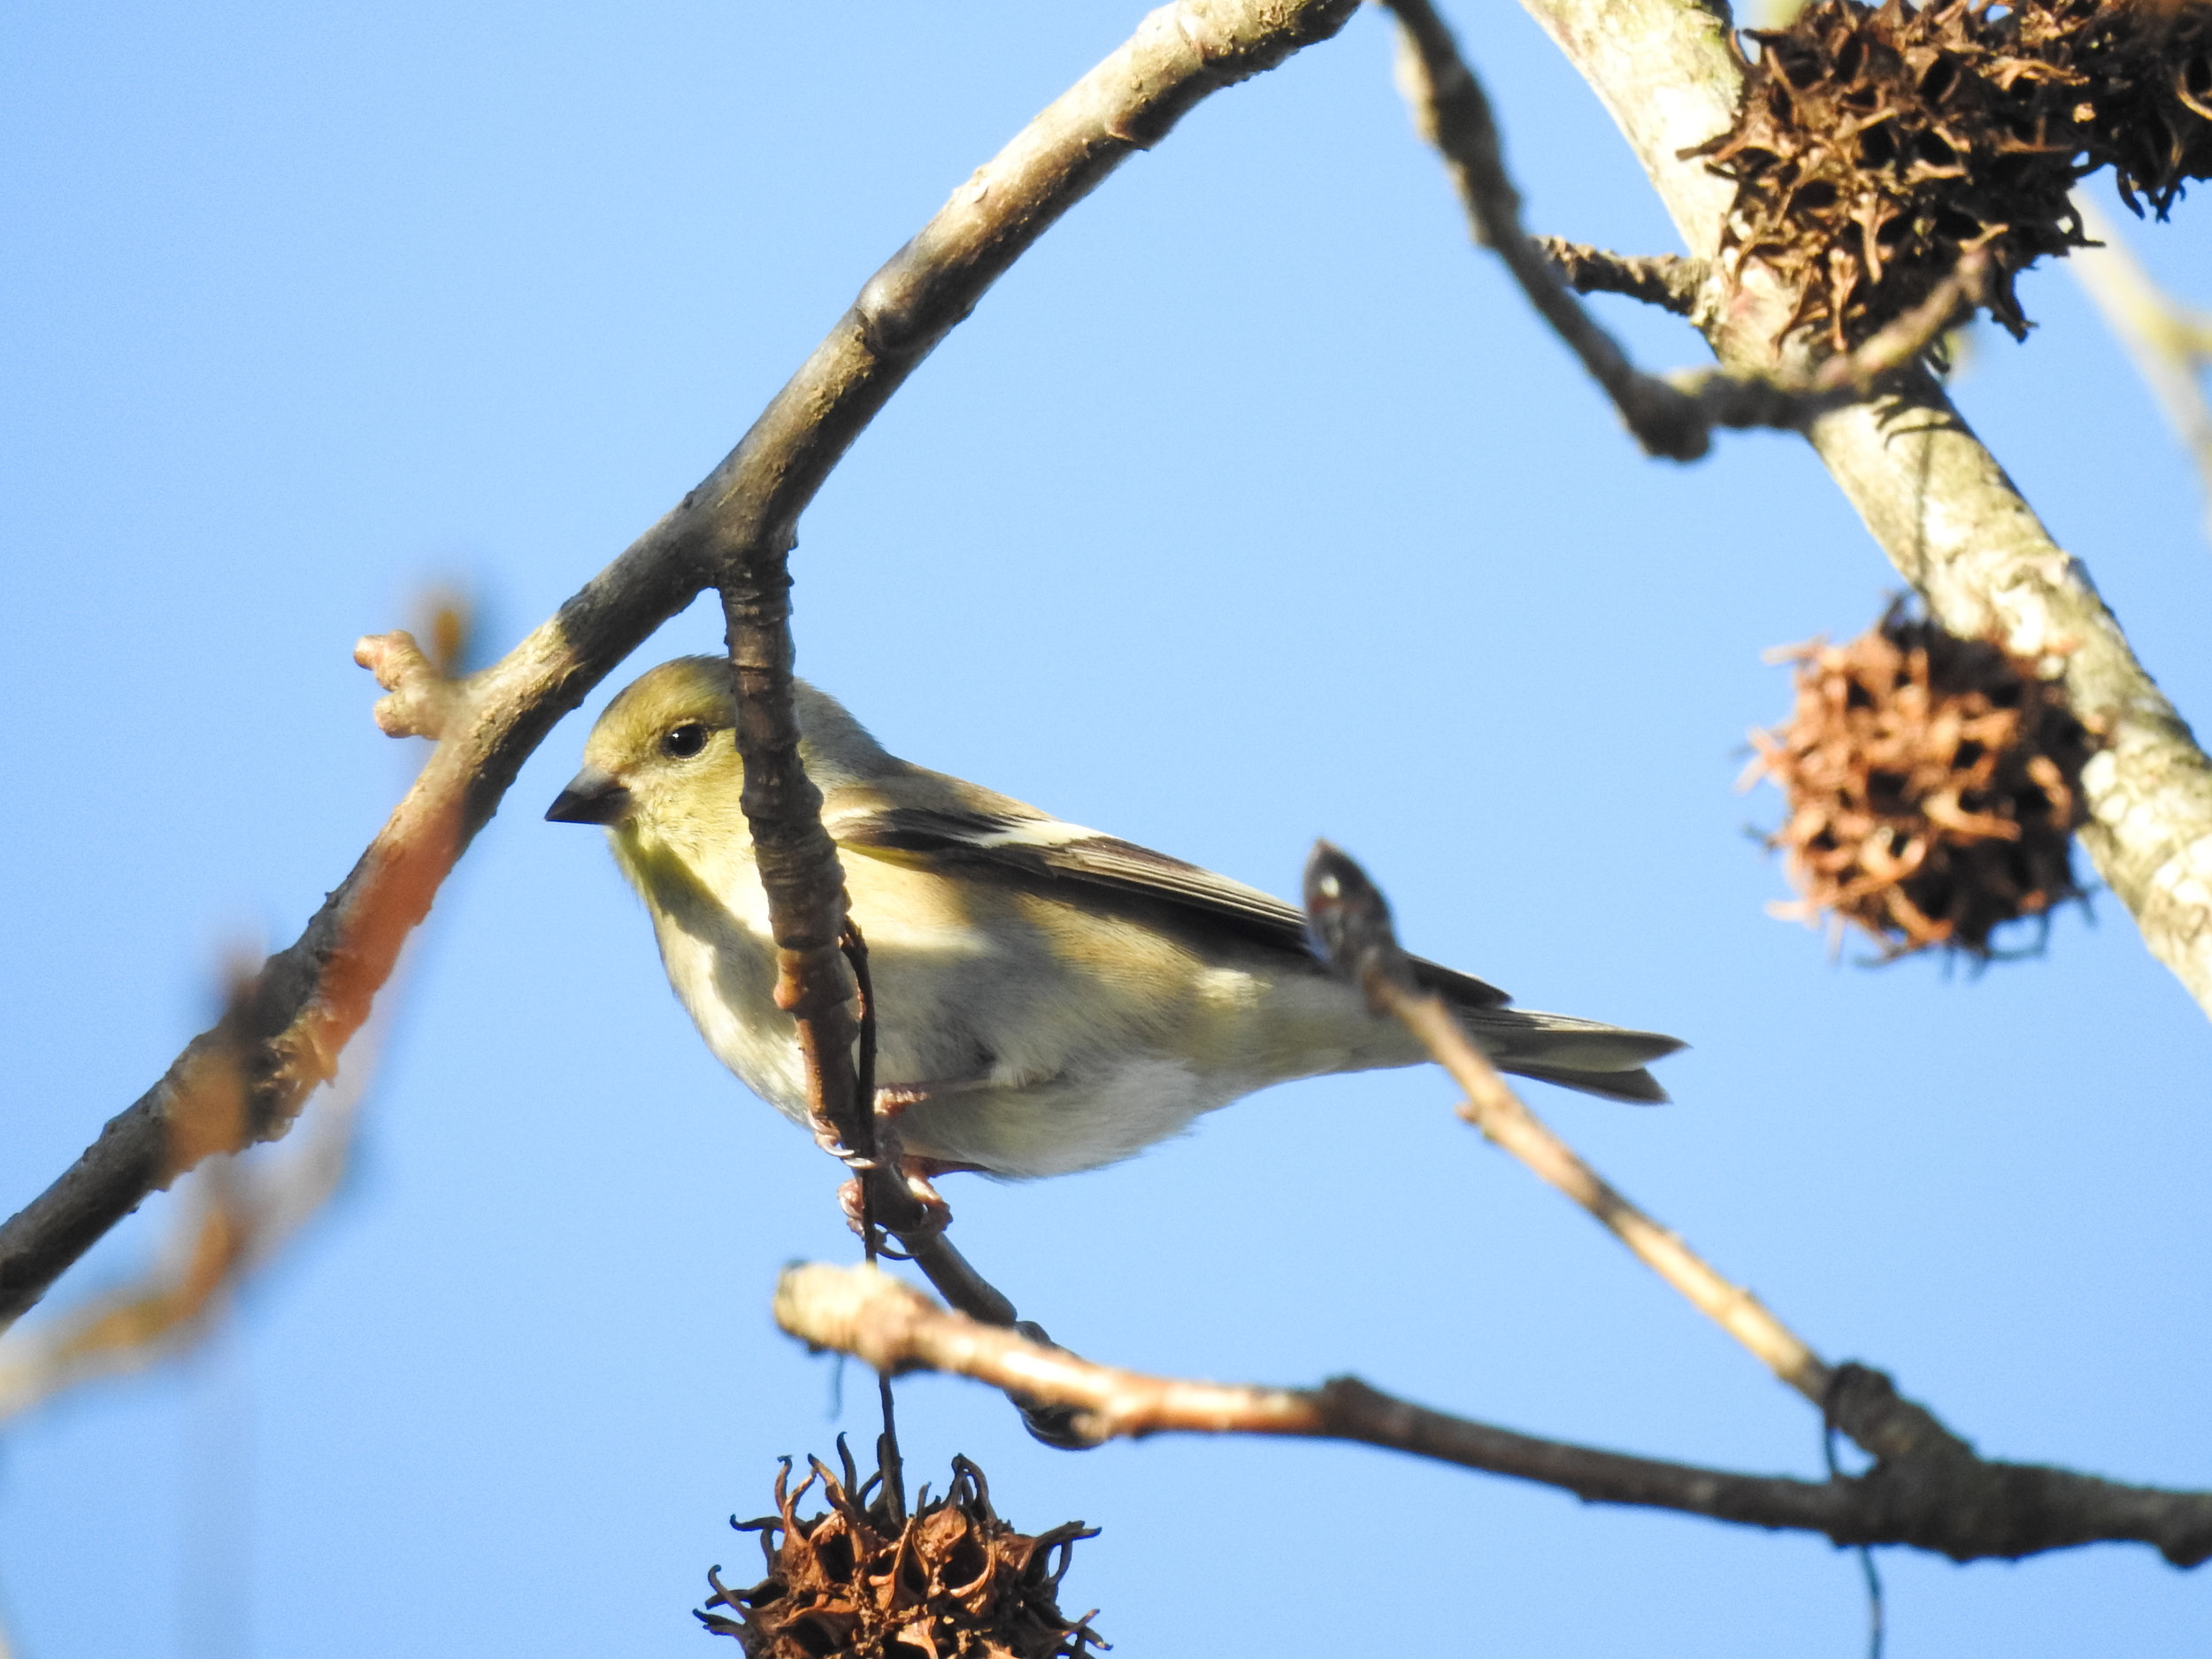 American Goldfinch, January 20, 2018